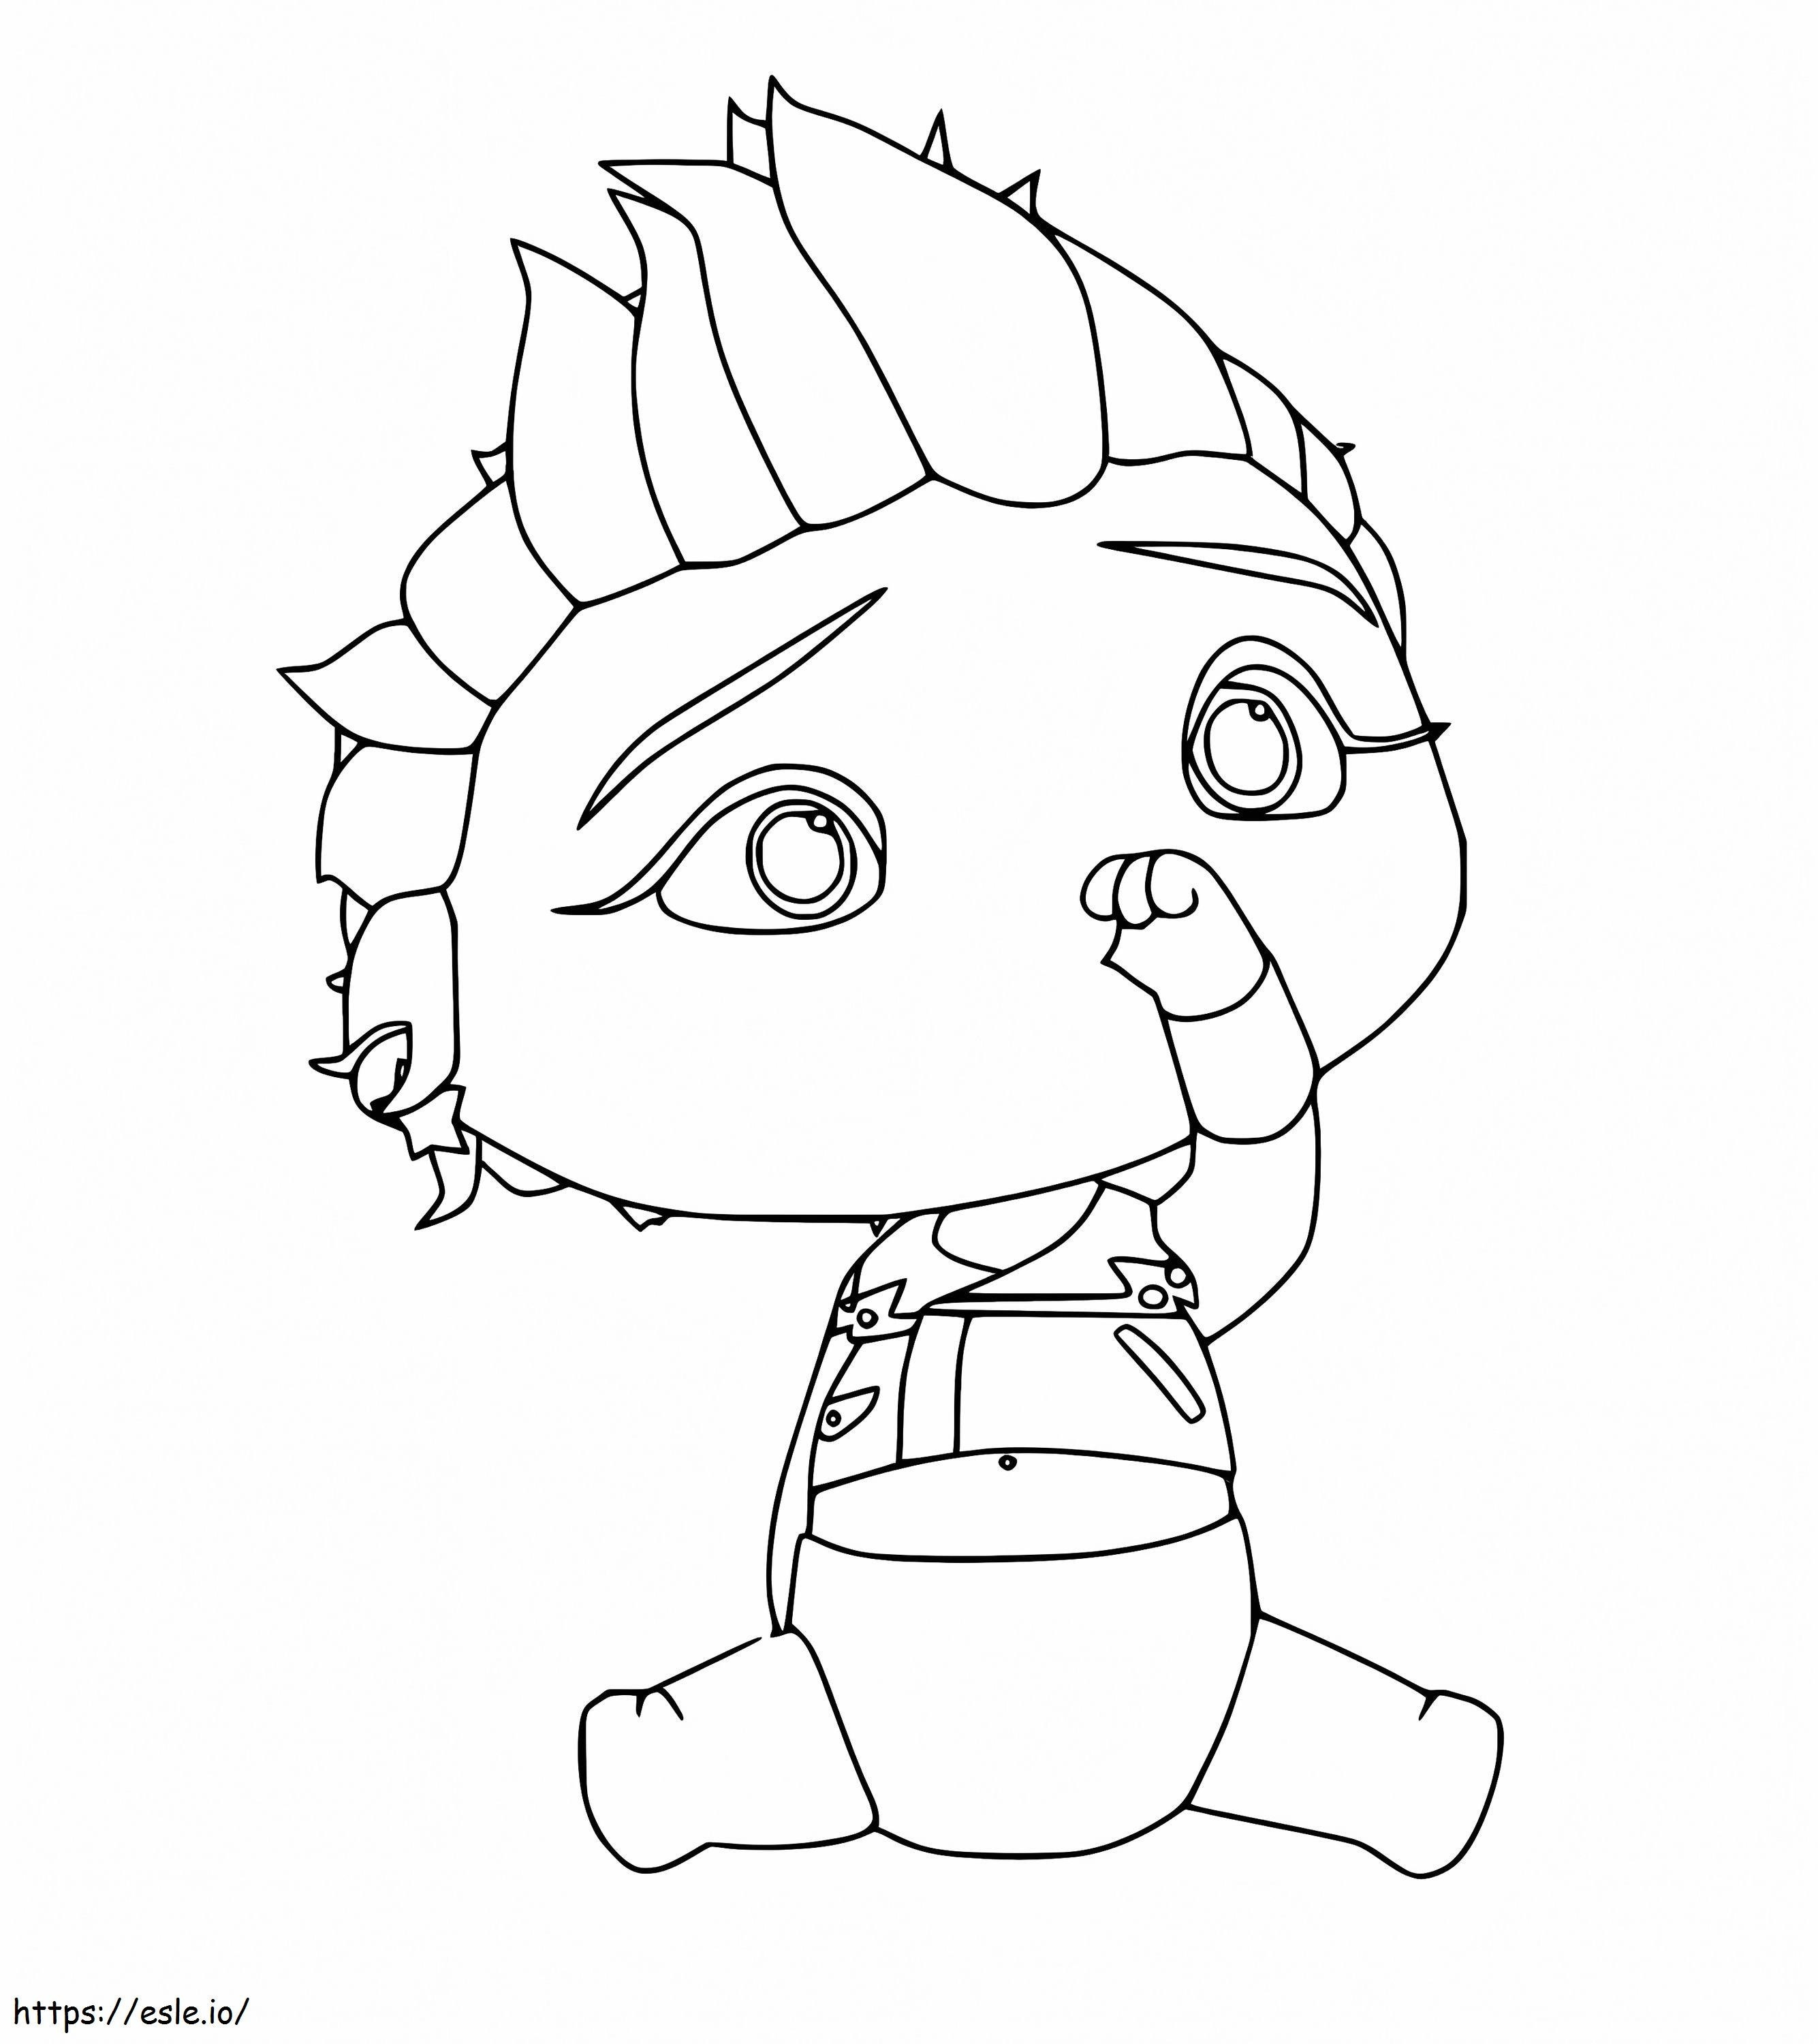 What From Mini Beat coloring page